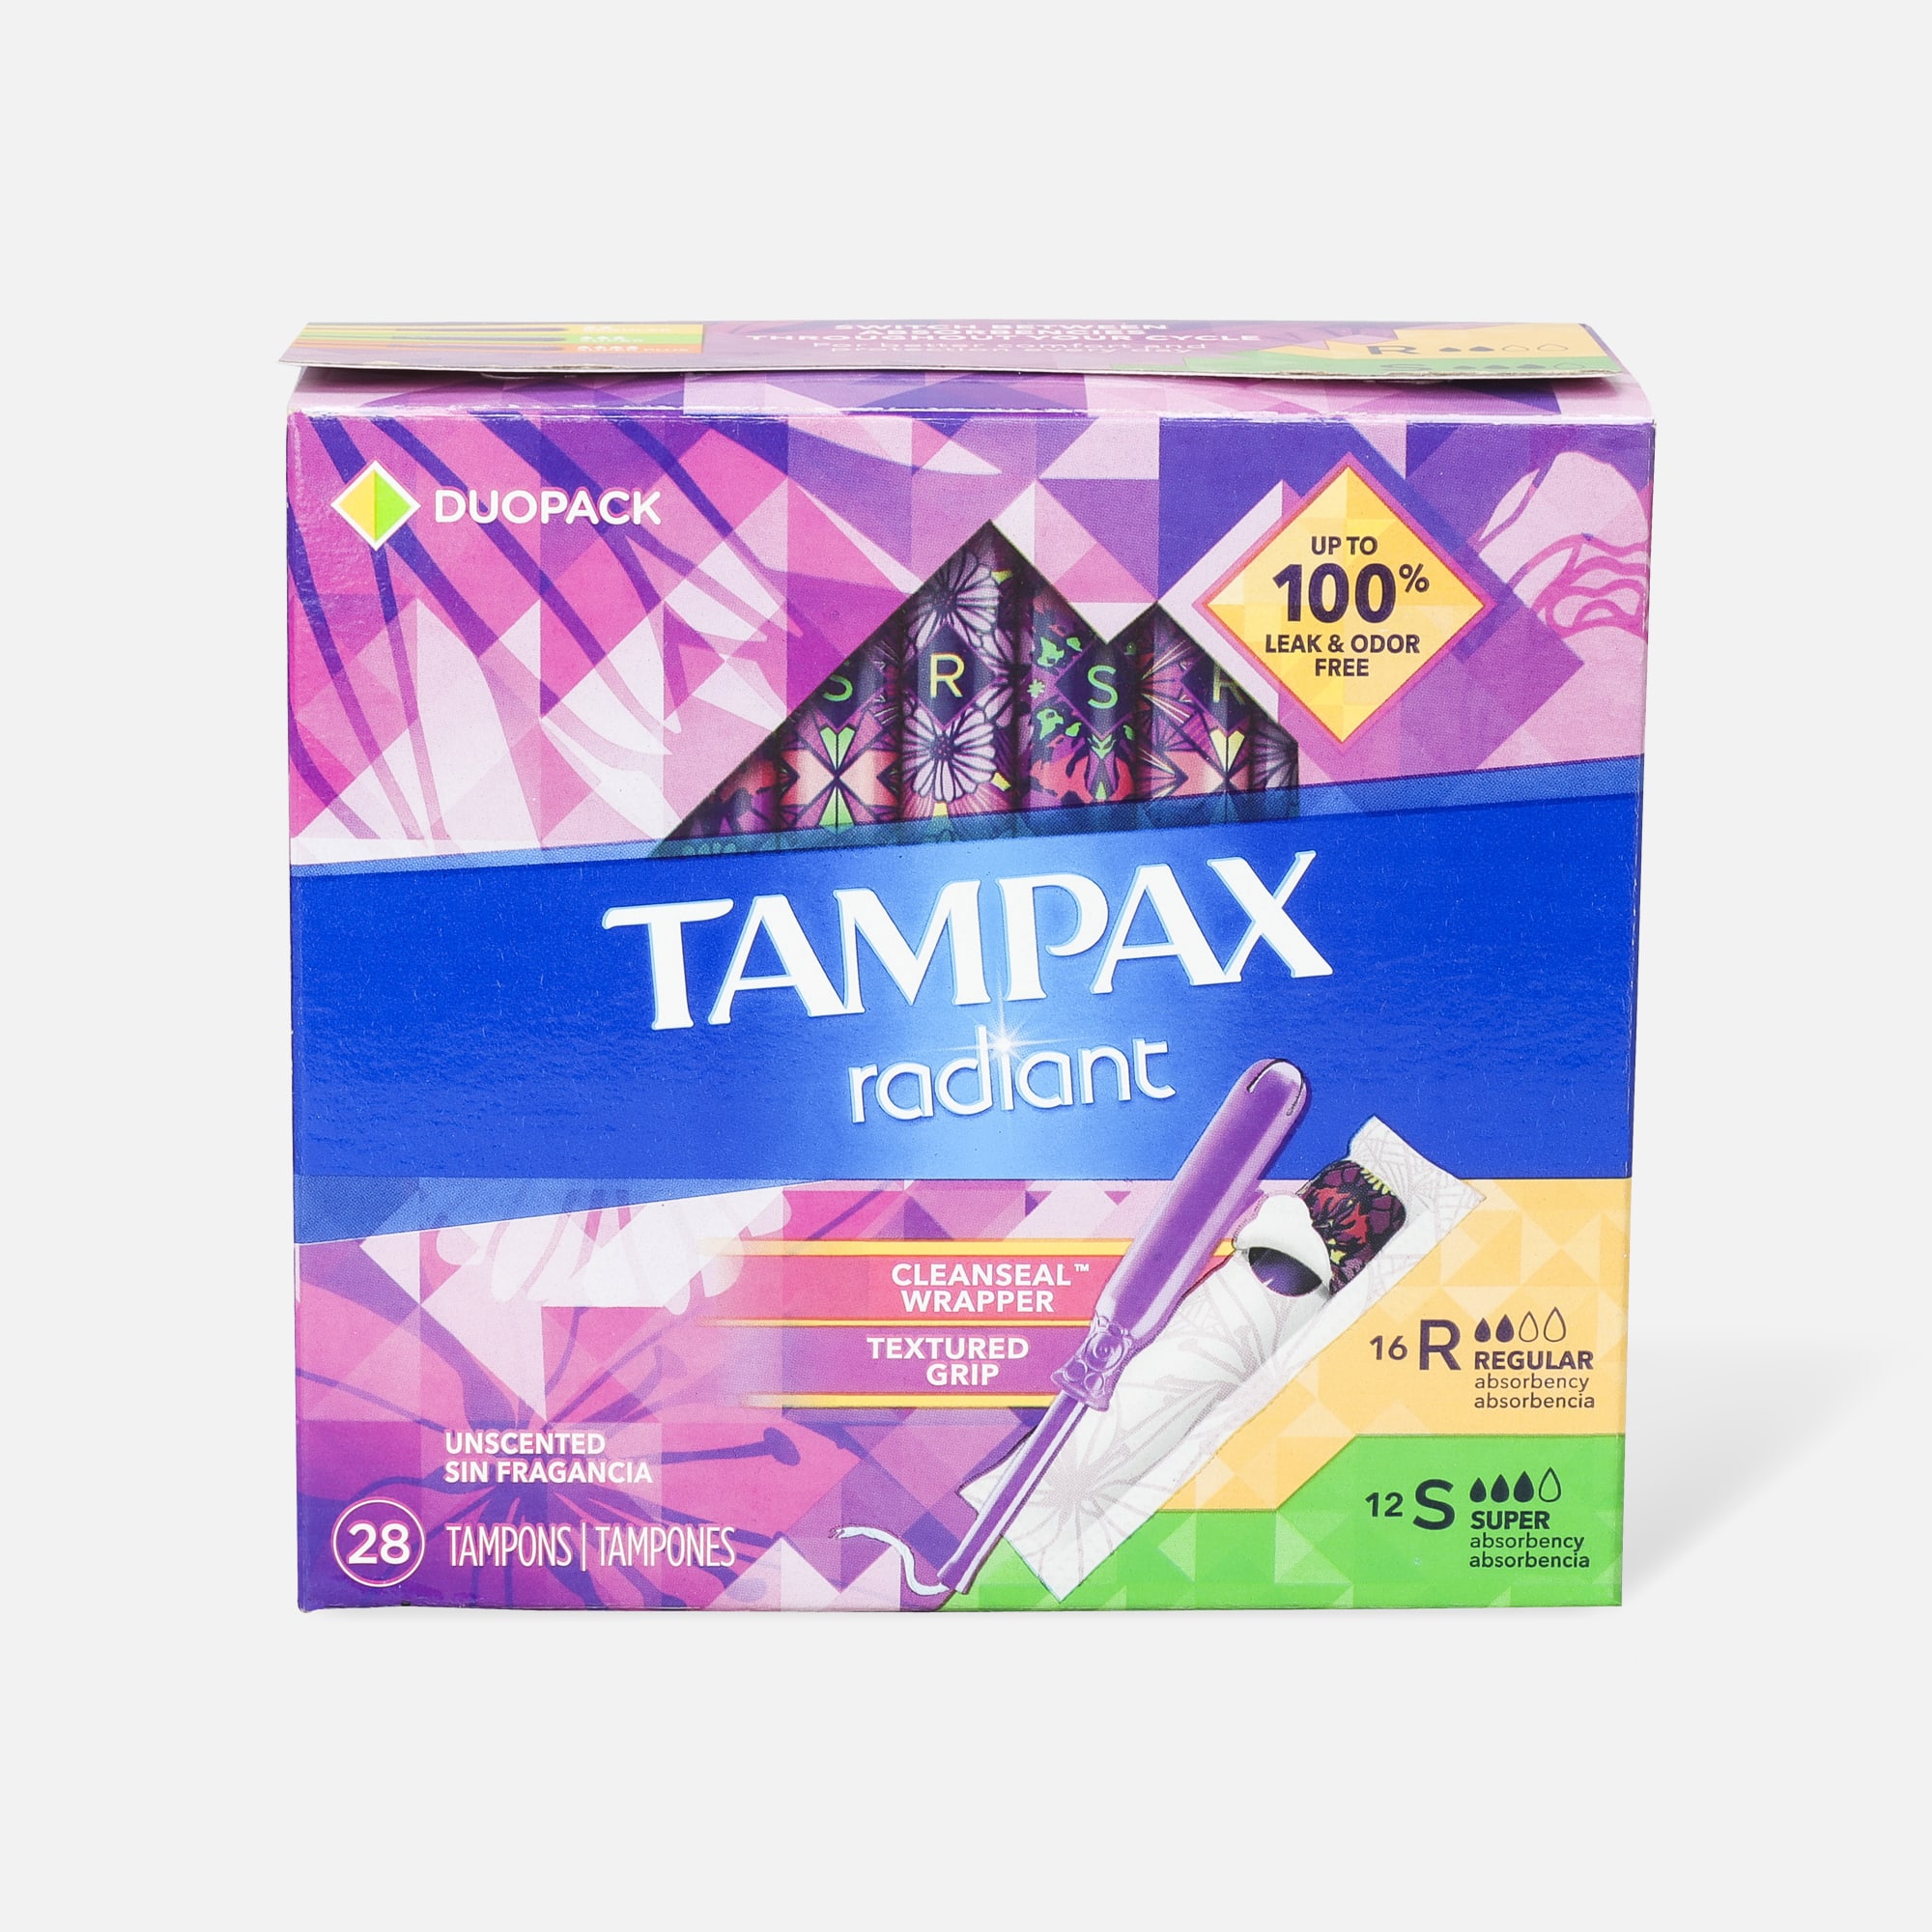 HSA Eligible  Tampax Radiant Tampons Duo Pack, Regular/Super Absorbency  with BPA-Free Plastic Applicator and LeakGuard Braid, Unscented, 28 Count